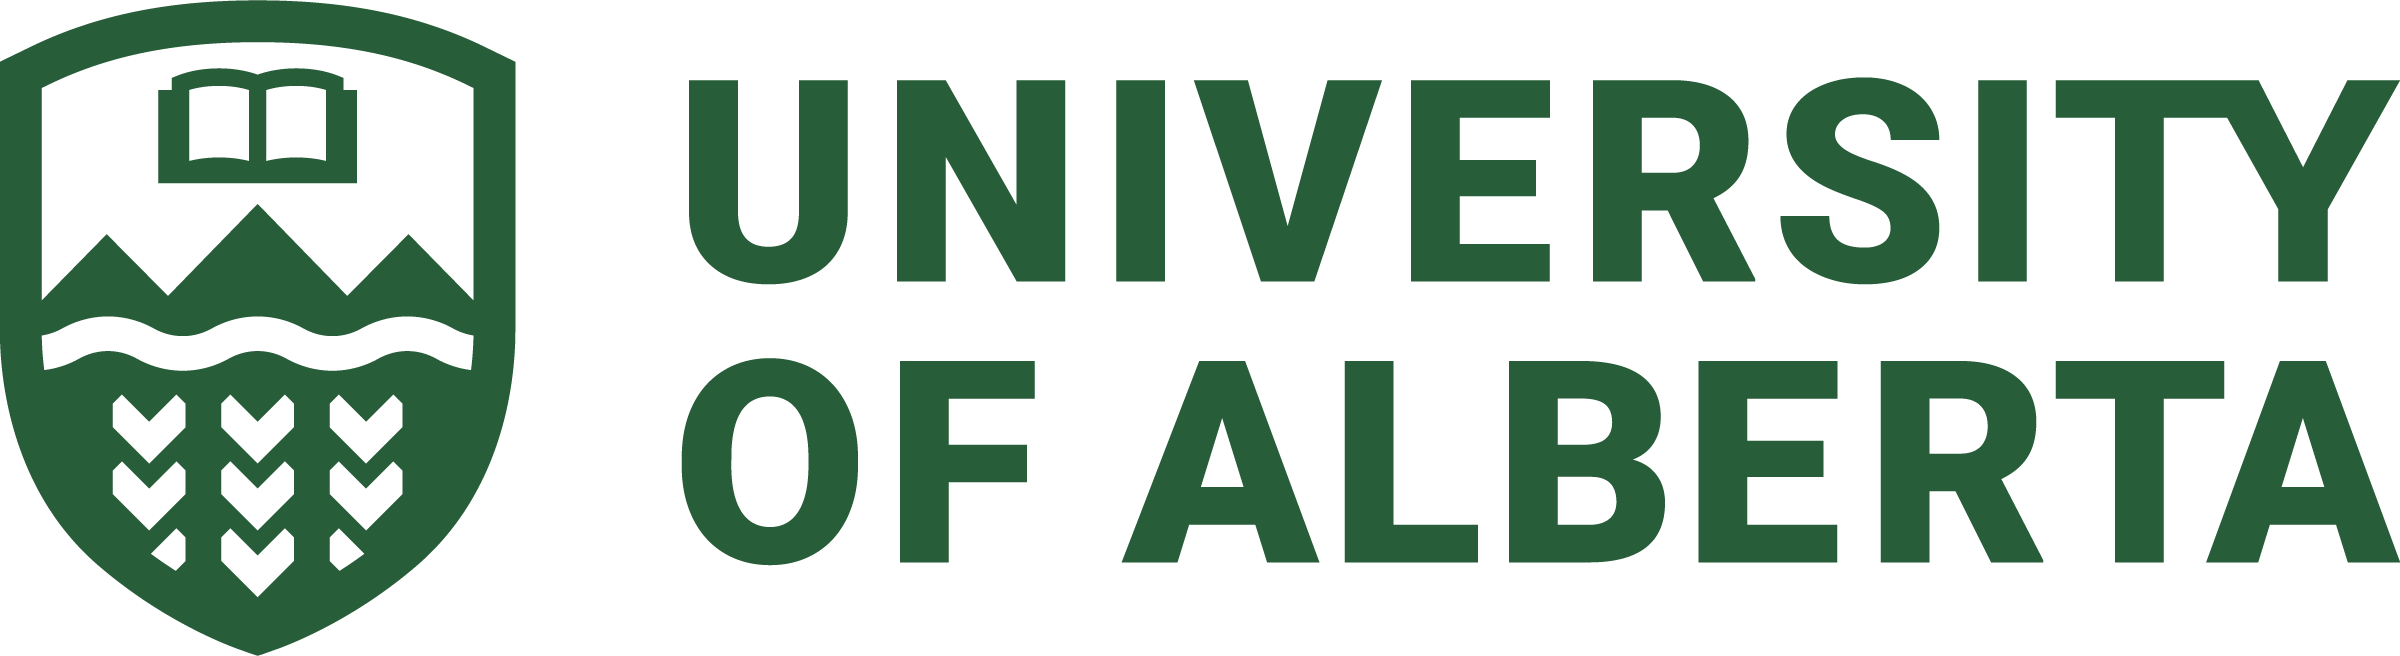 University of Alberta logo in color on a transparent background